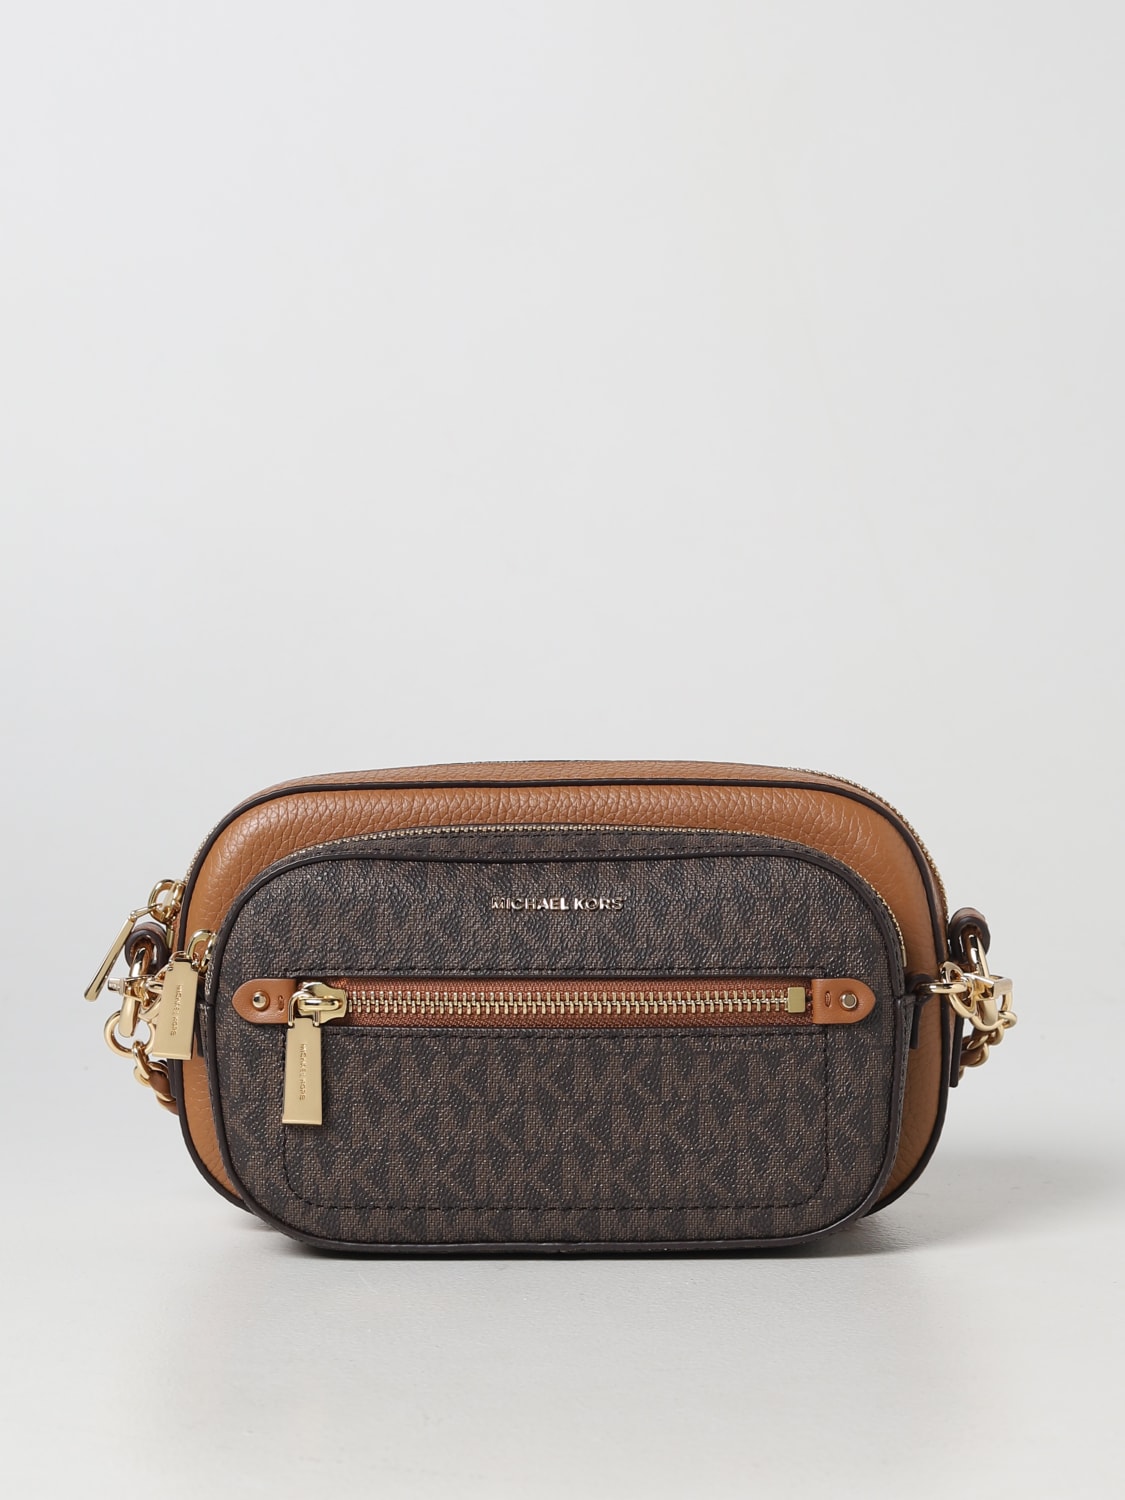 MICHAEL KORS: Michael bag in grained leather with MK clutch